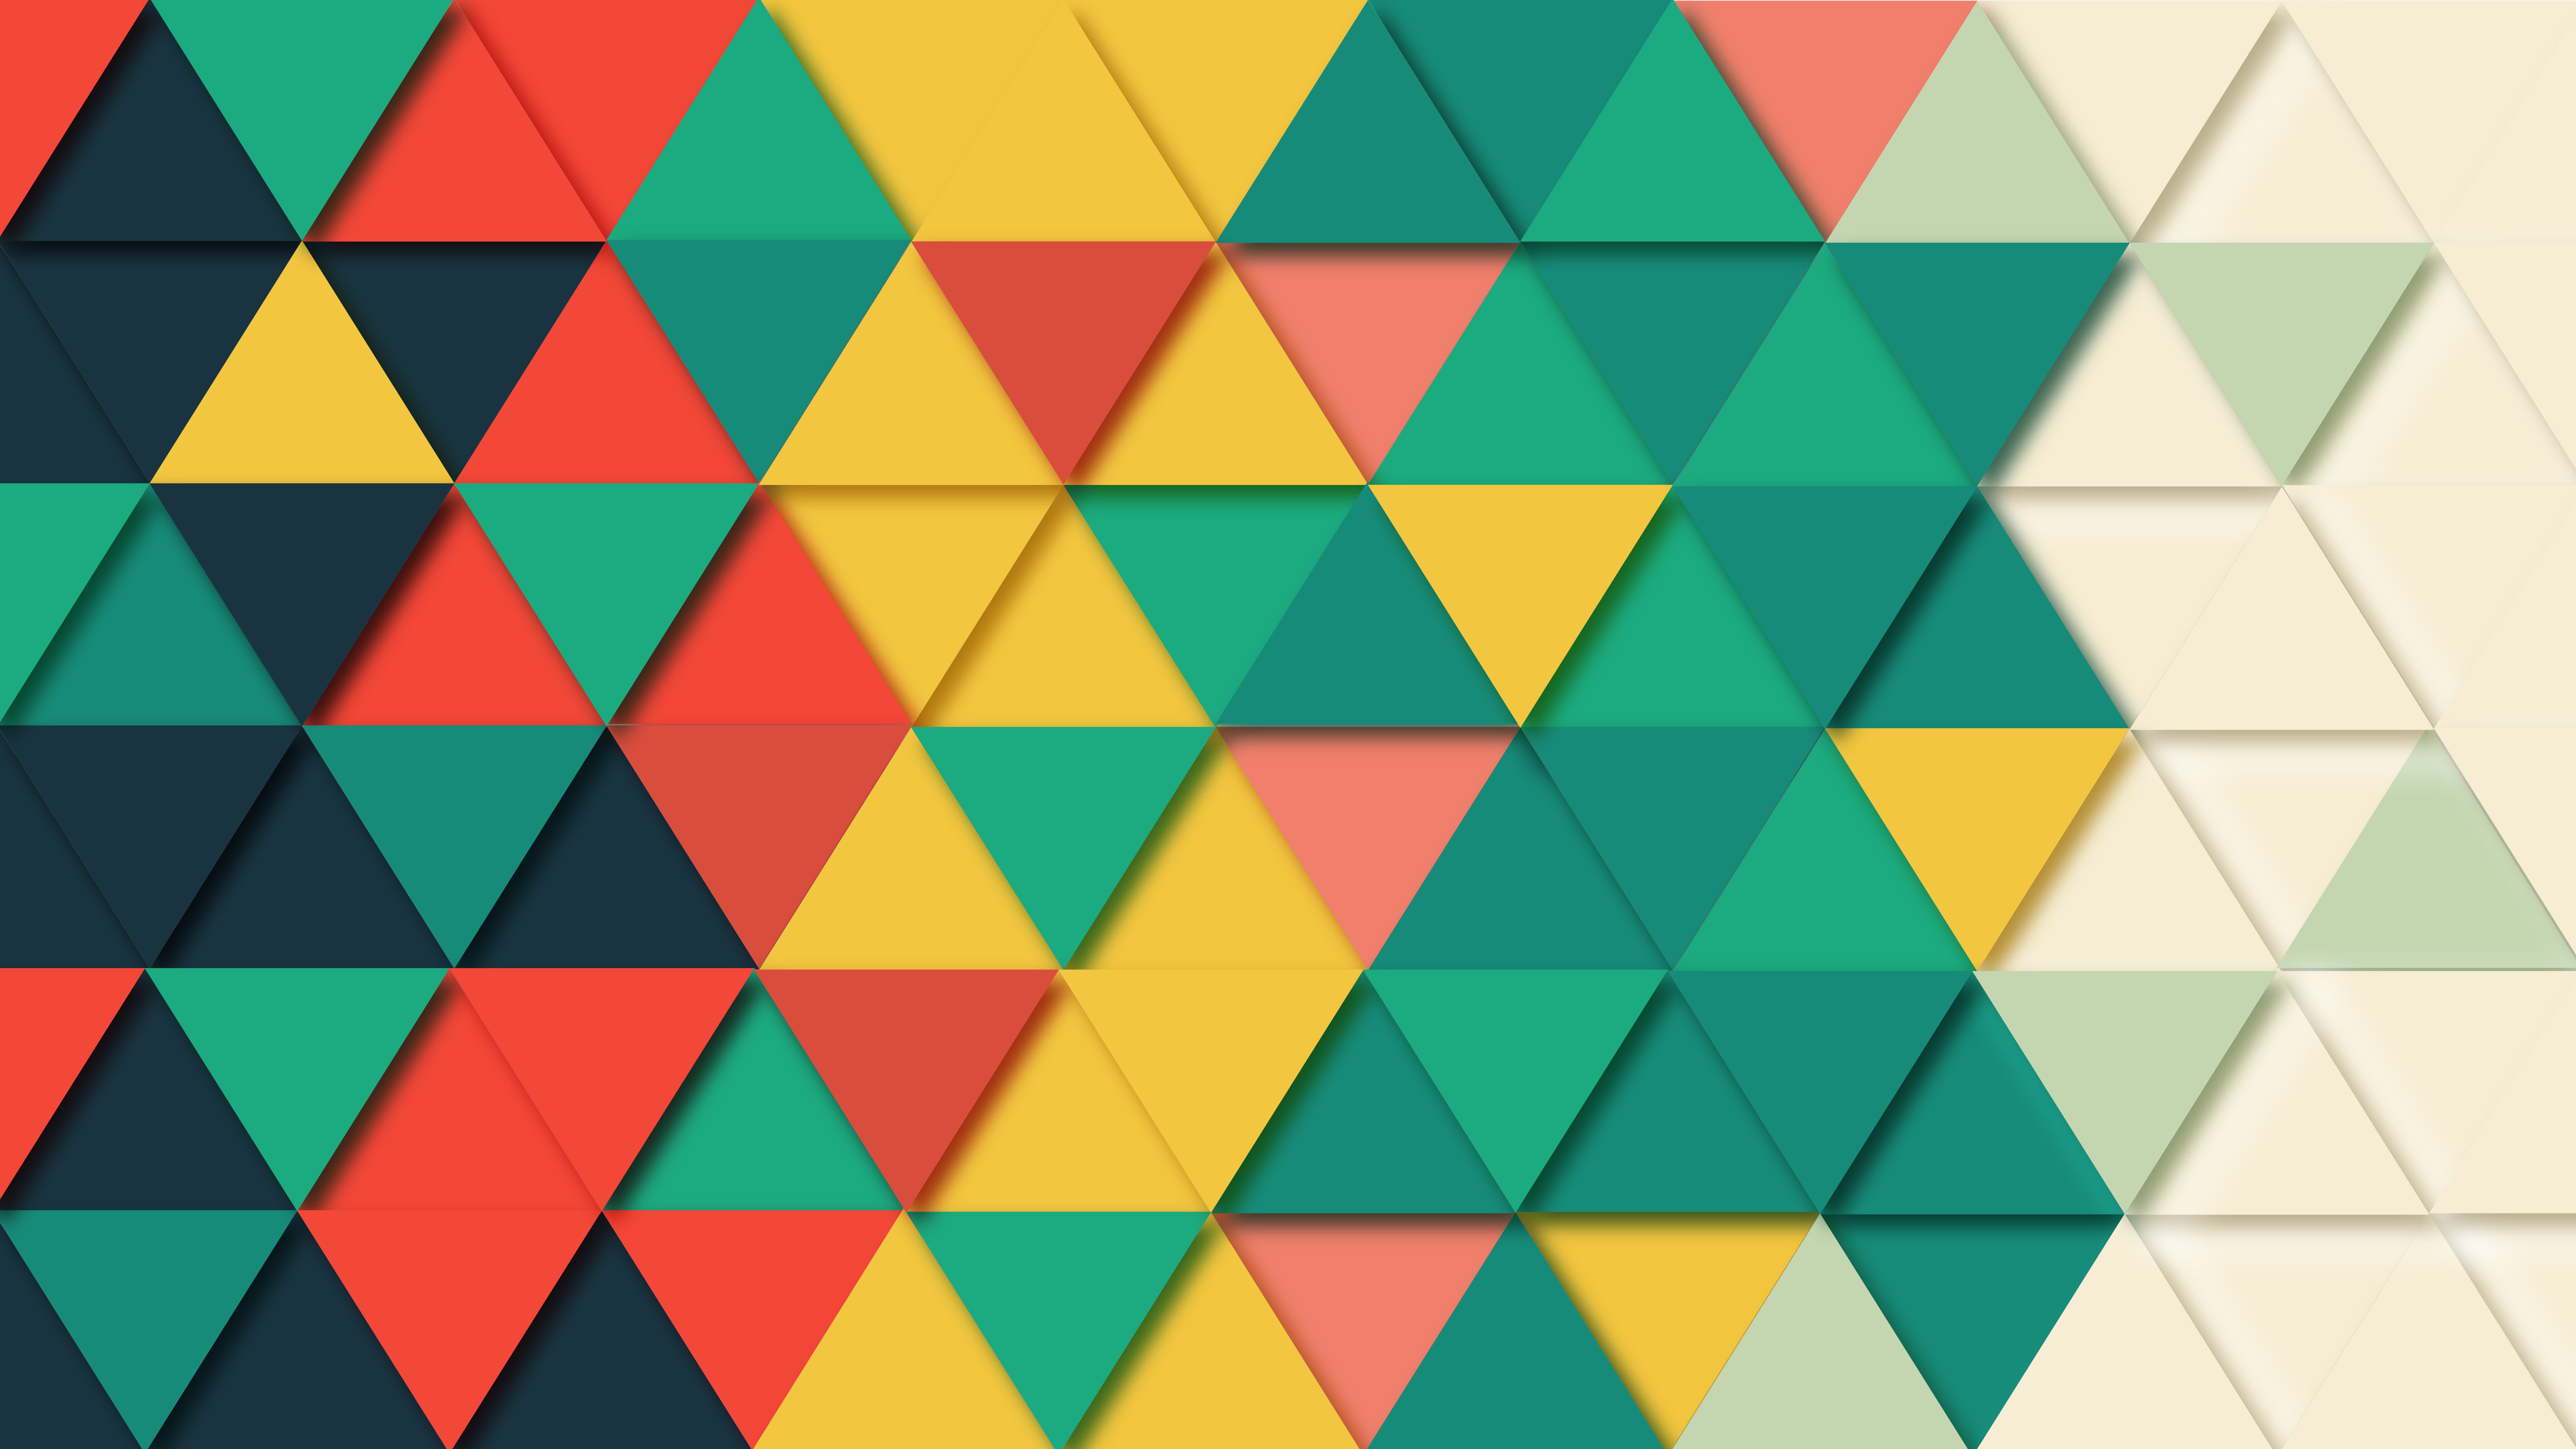 Download free high resolution Pattern background 4k - for graphic design